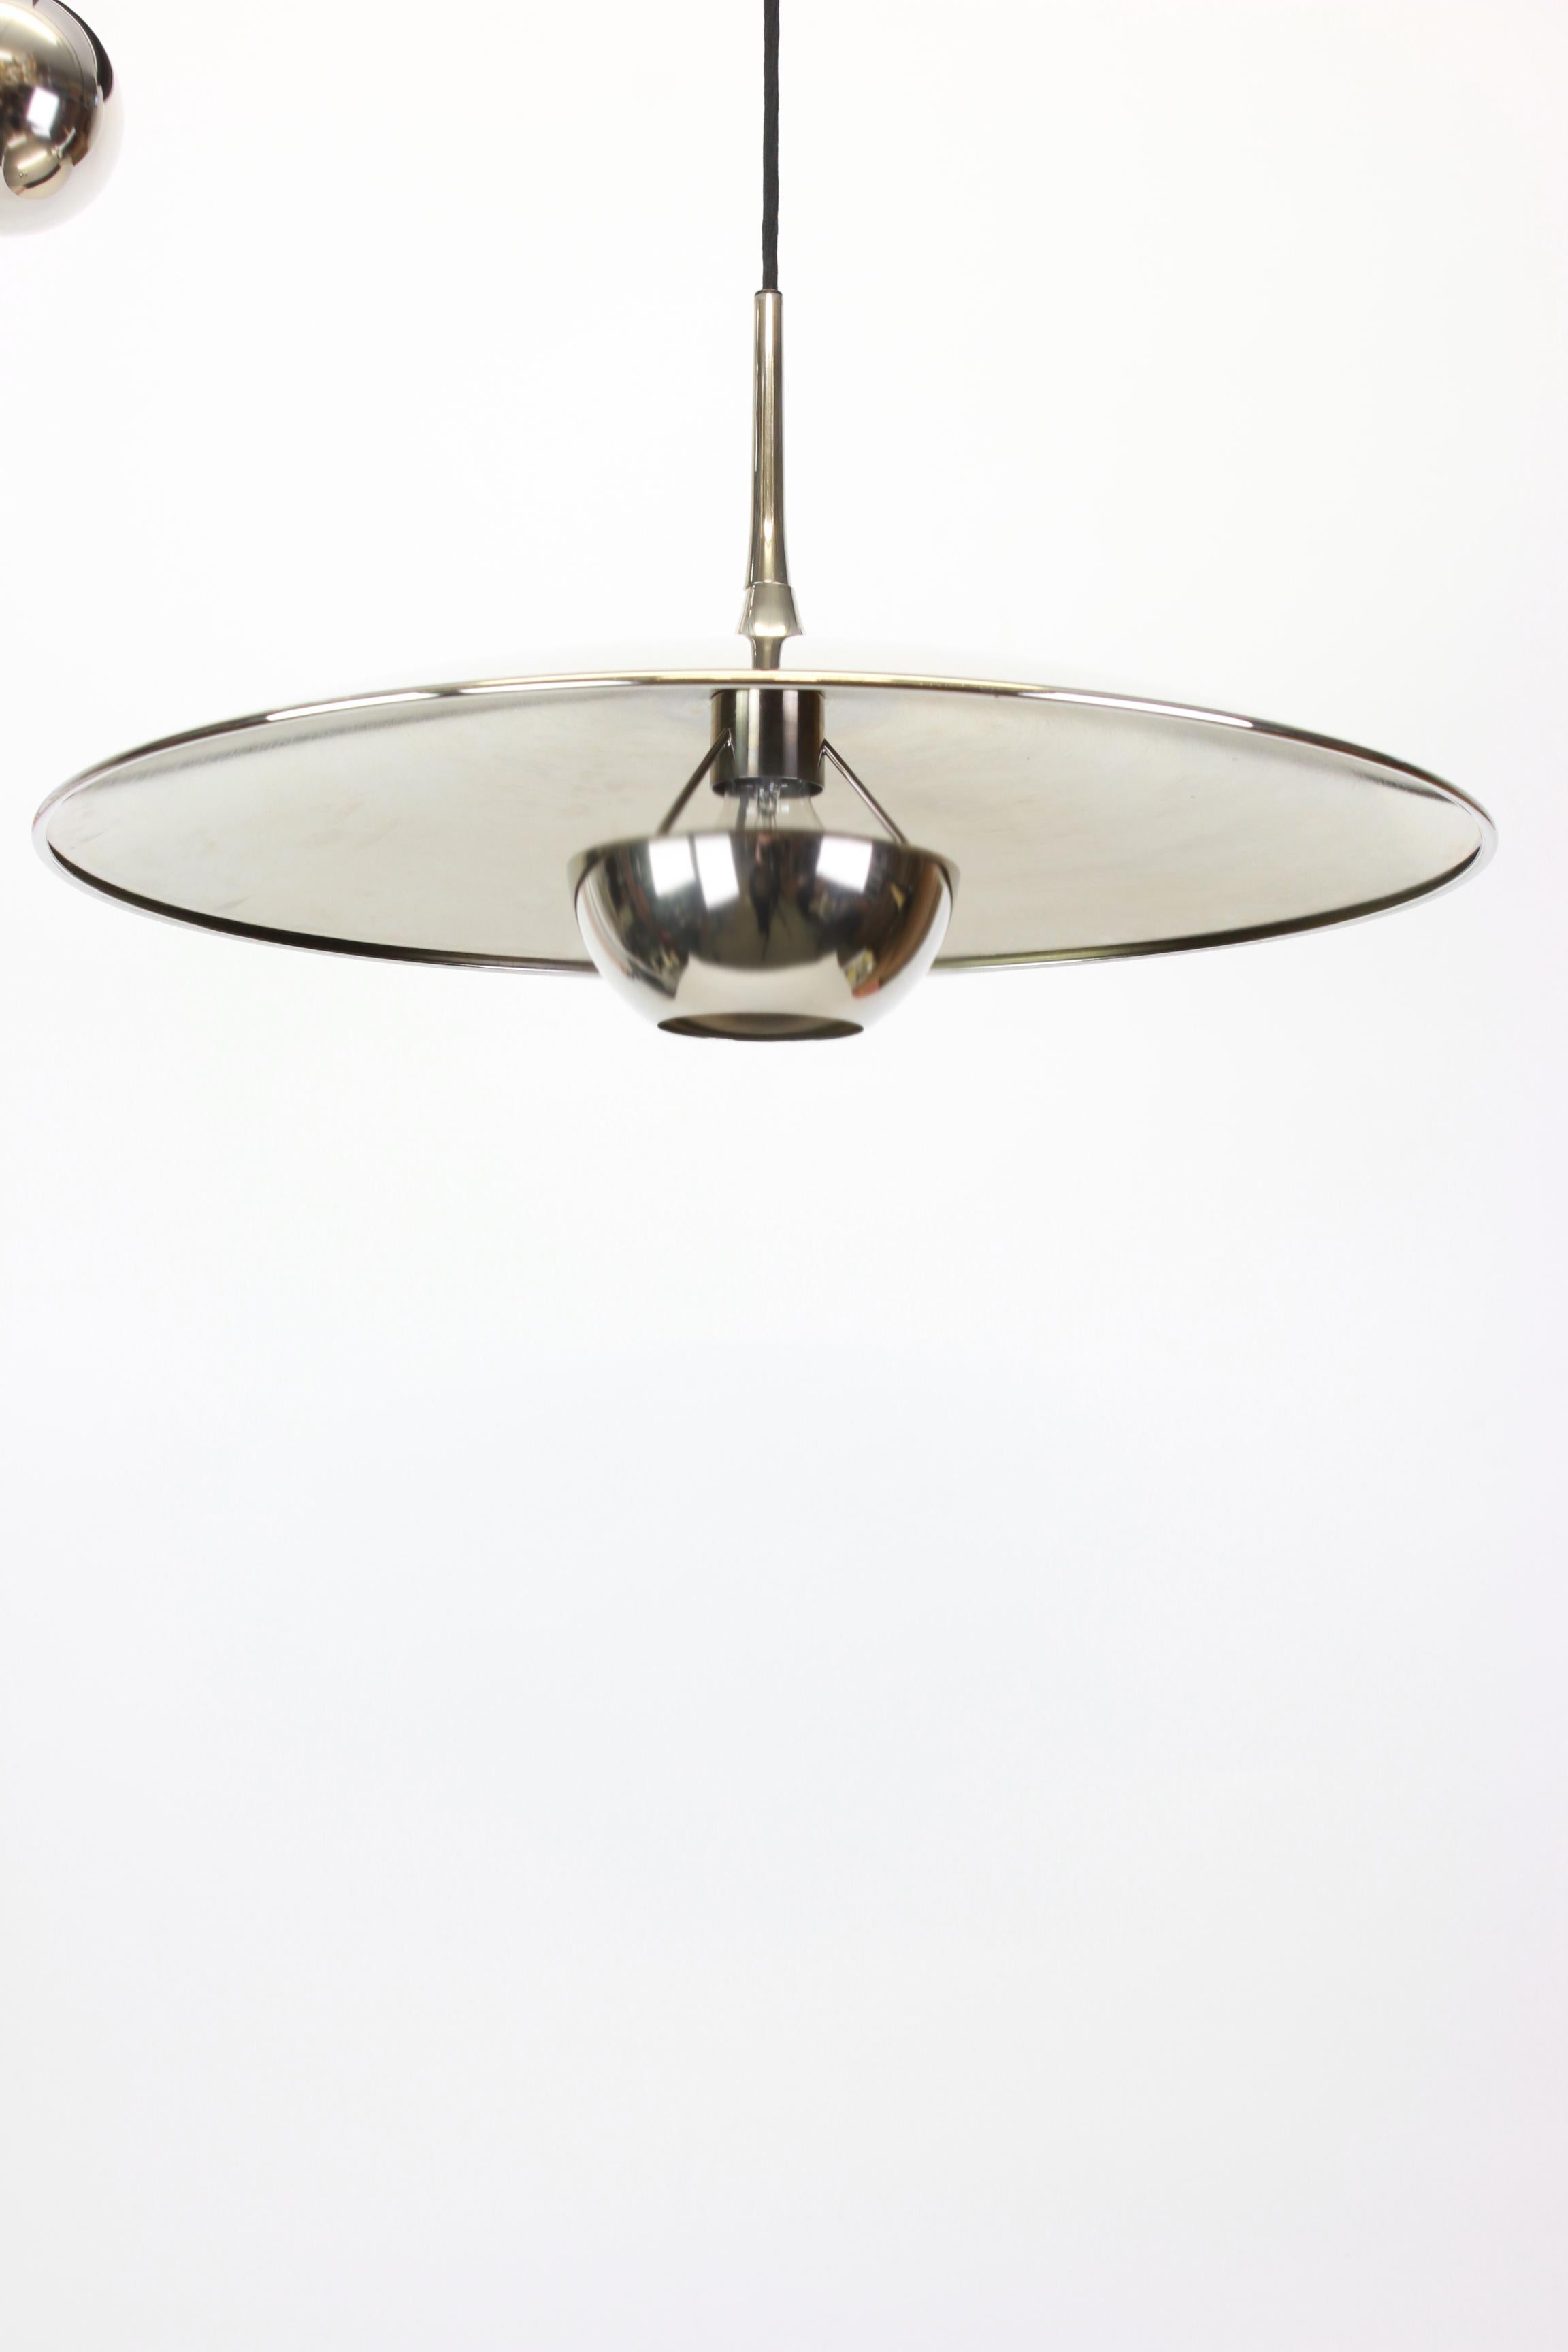 Mid-Century Modern Large Adjustable Chrome Counterweight Pendant Light by Florian Schulz, Germany